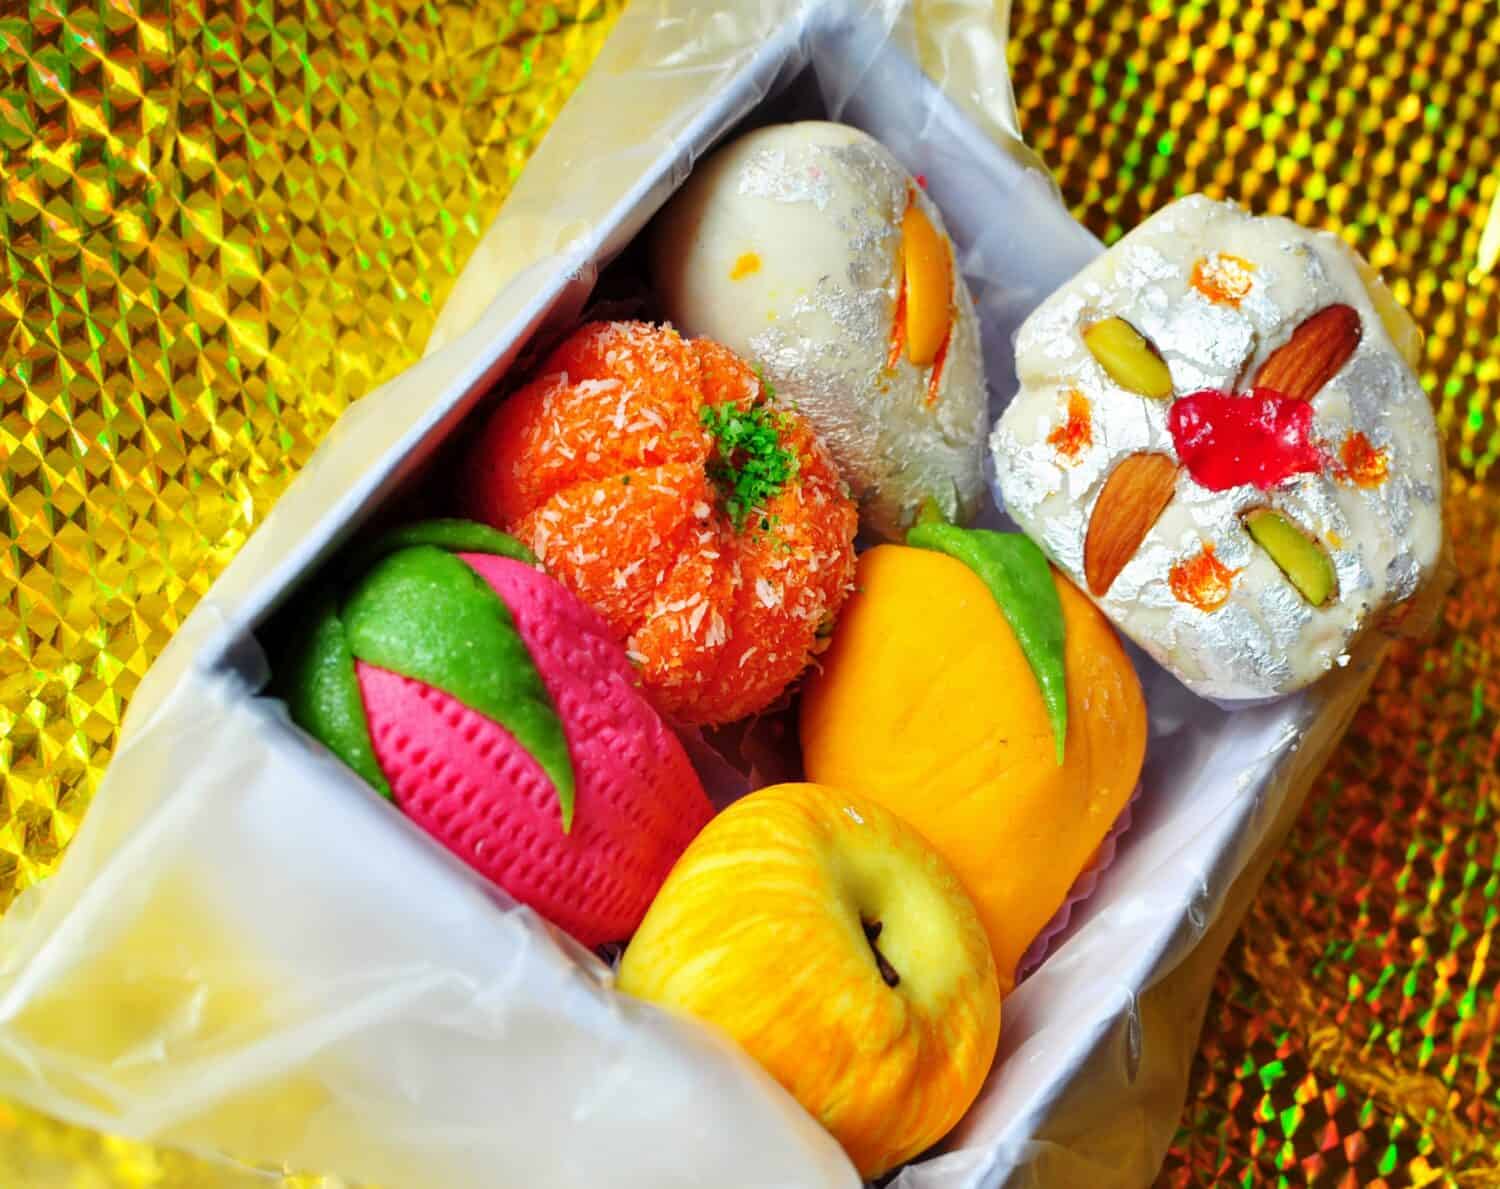 Diwali mithai, Box of colorful sweets made of milk, sugar and nuts.